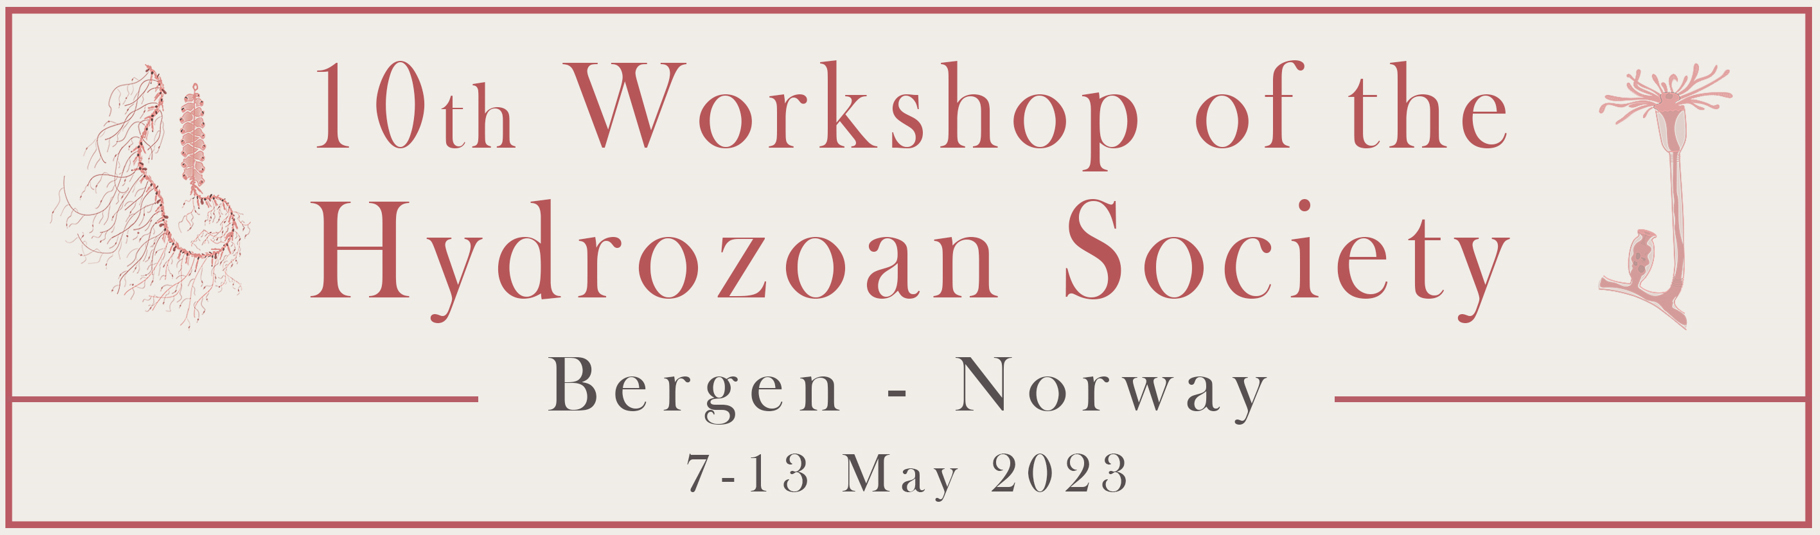 10th Workshop of the Hydrozoan Society in Bergen, Norway, 7-13 May 2023